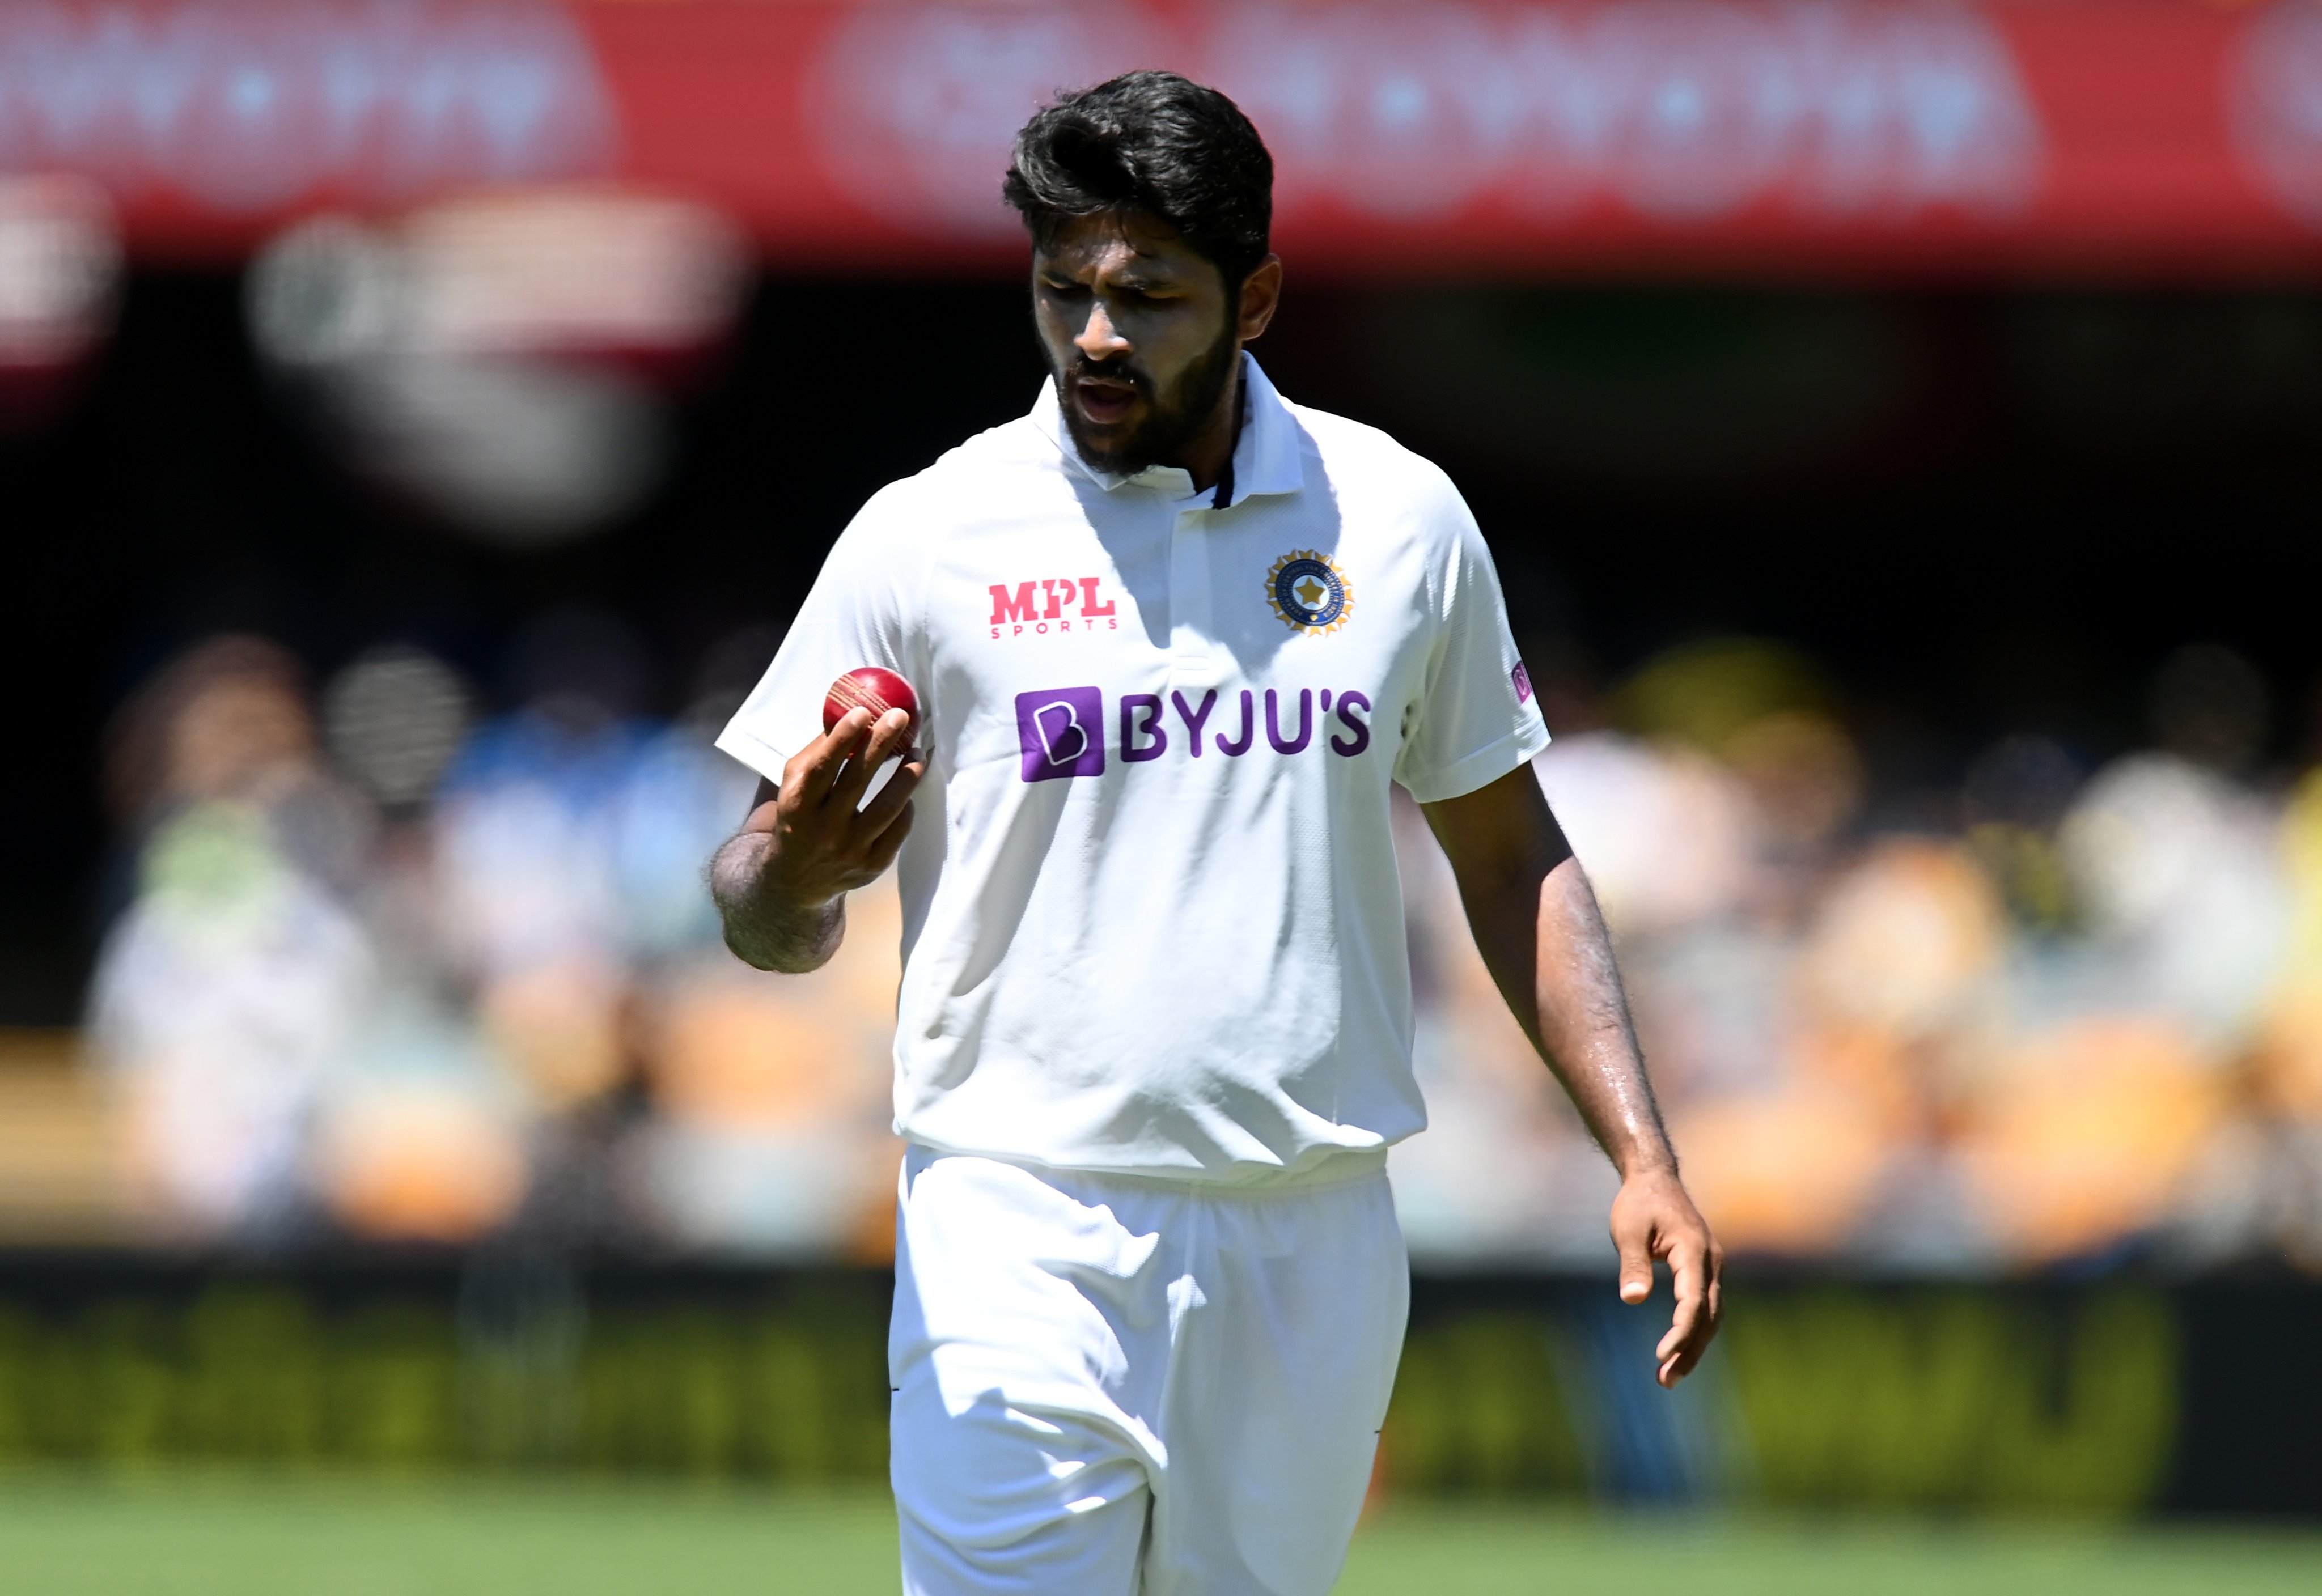 Shardul Thakur’s inglorious second-debut shows more worry than promise